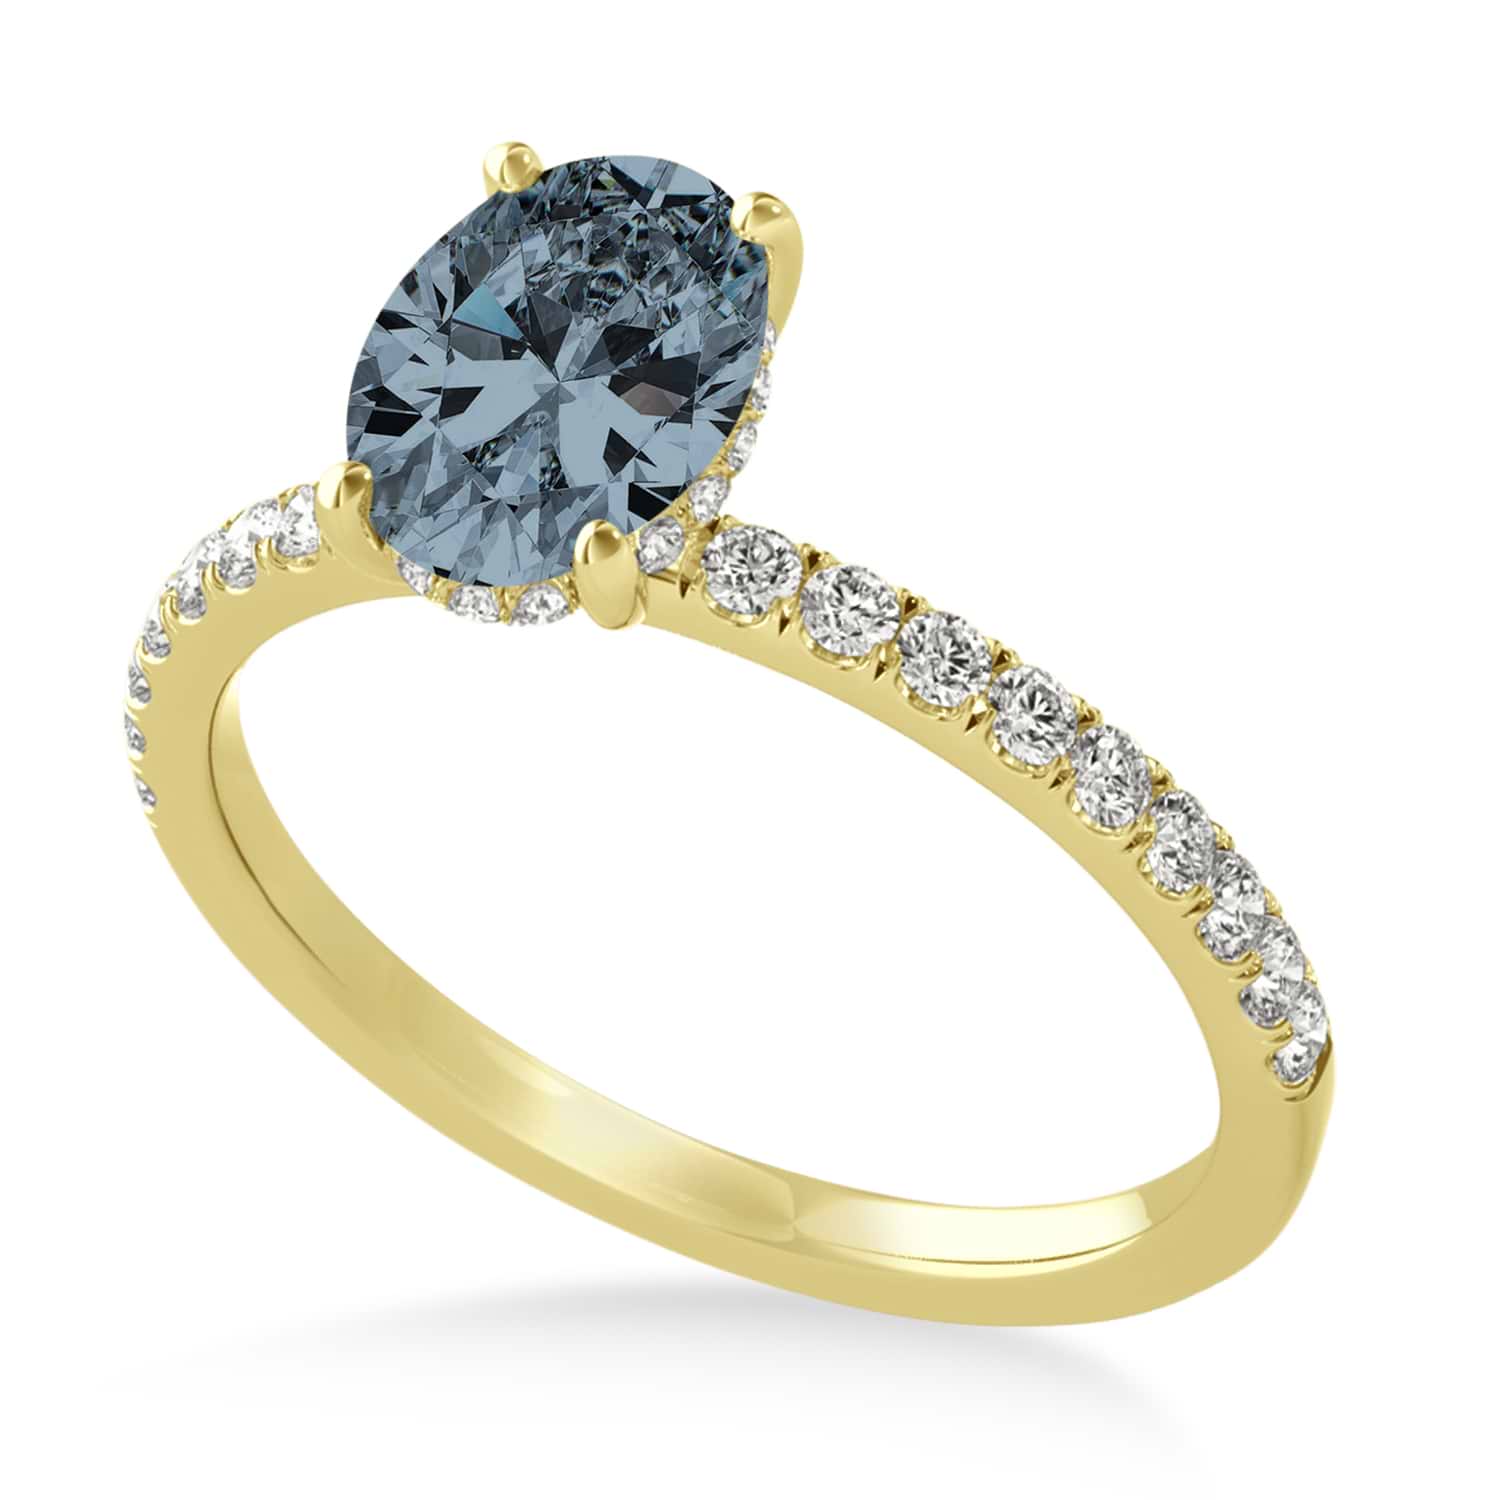 Oval Gray Spinel & Diamond Single Row Hidden Halo Engagement Ring 18k Yellow Gold (0.68ct)